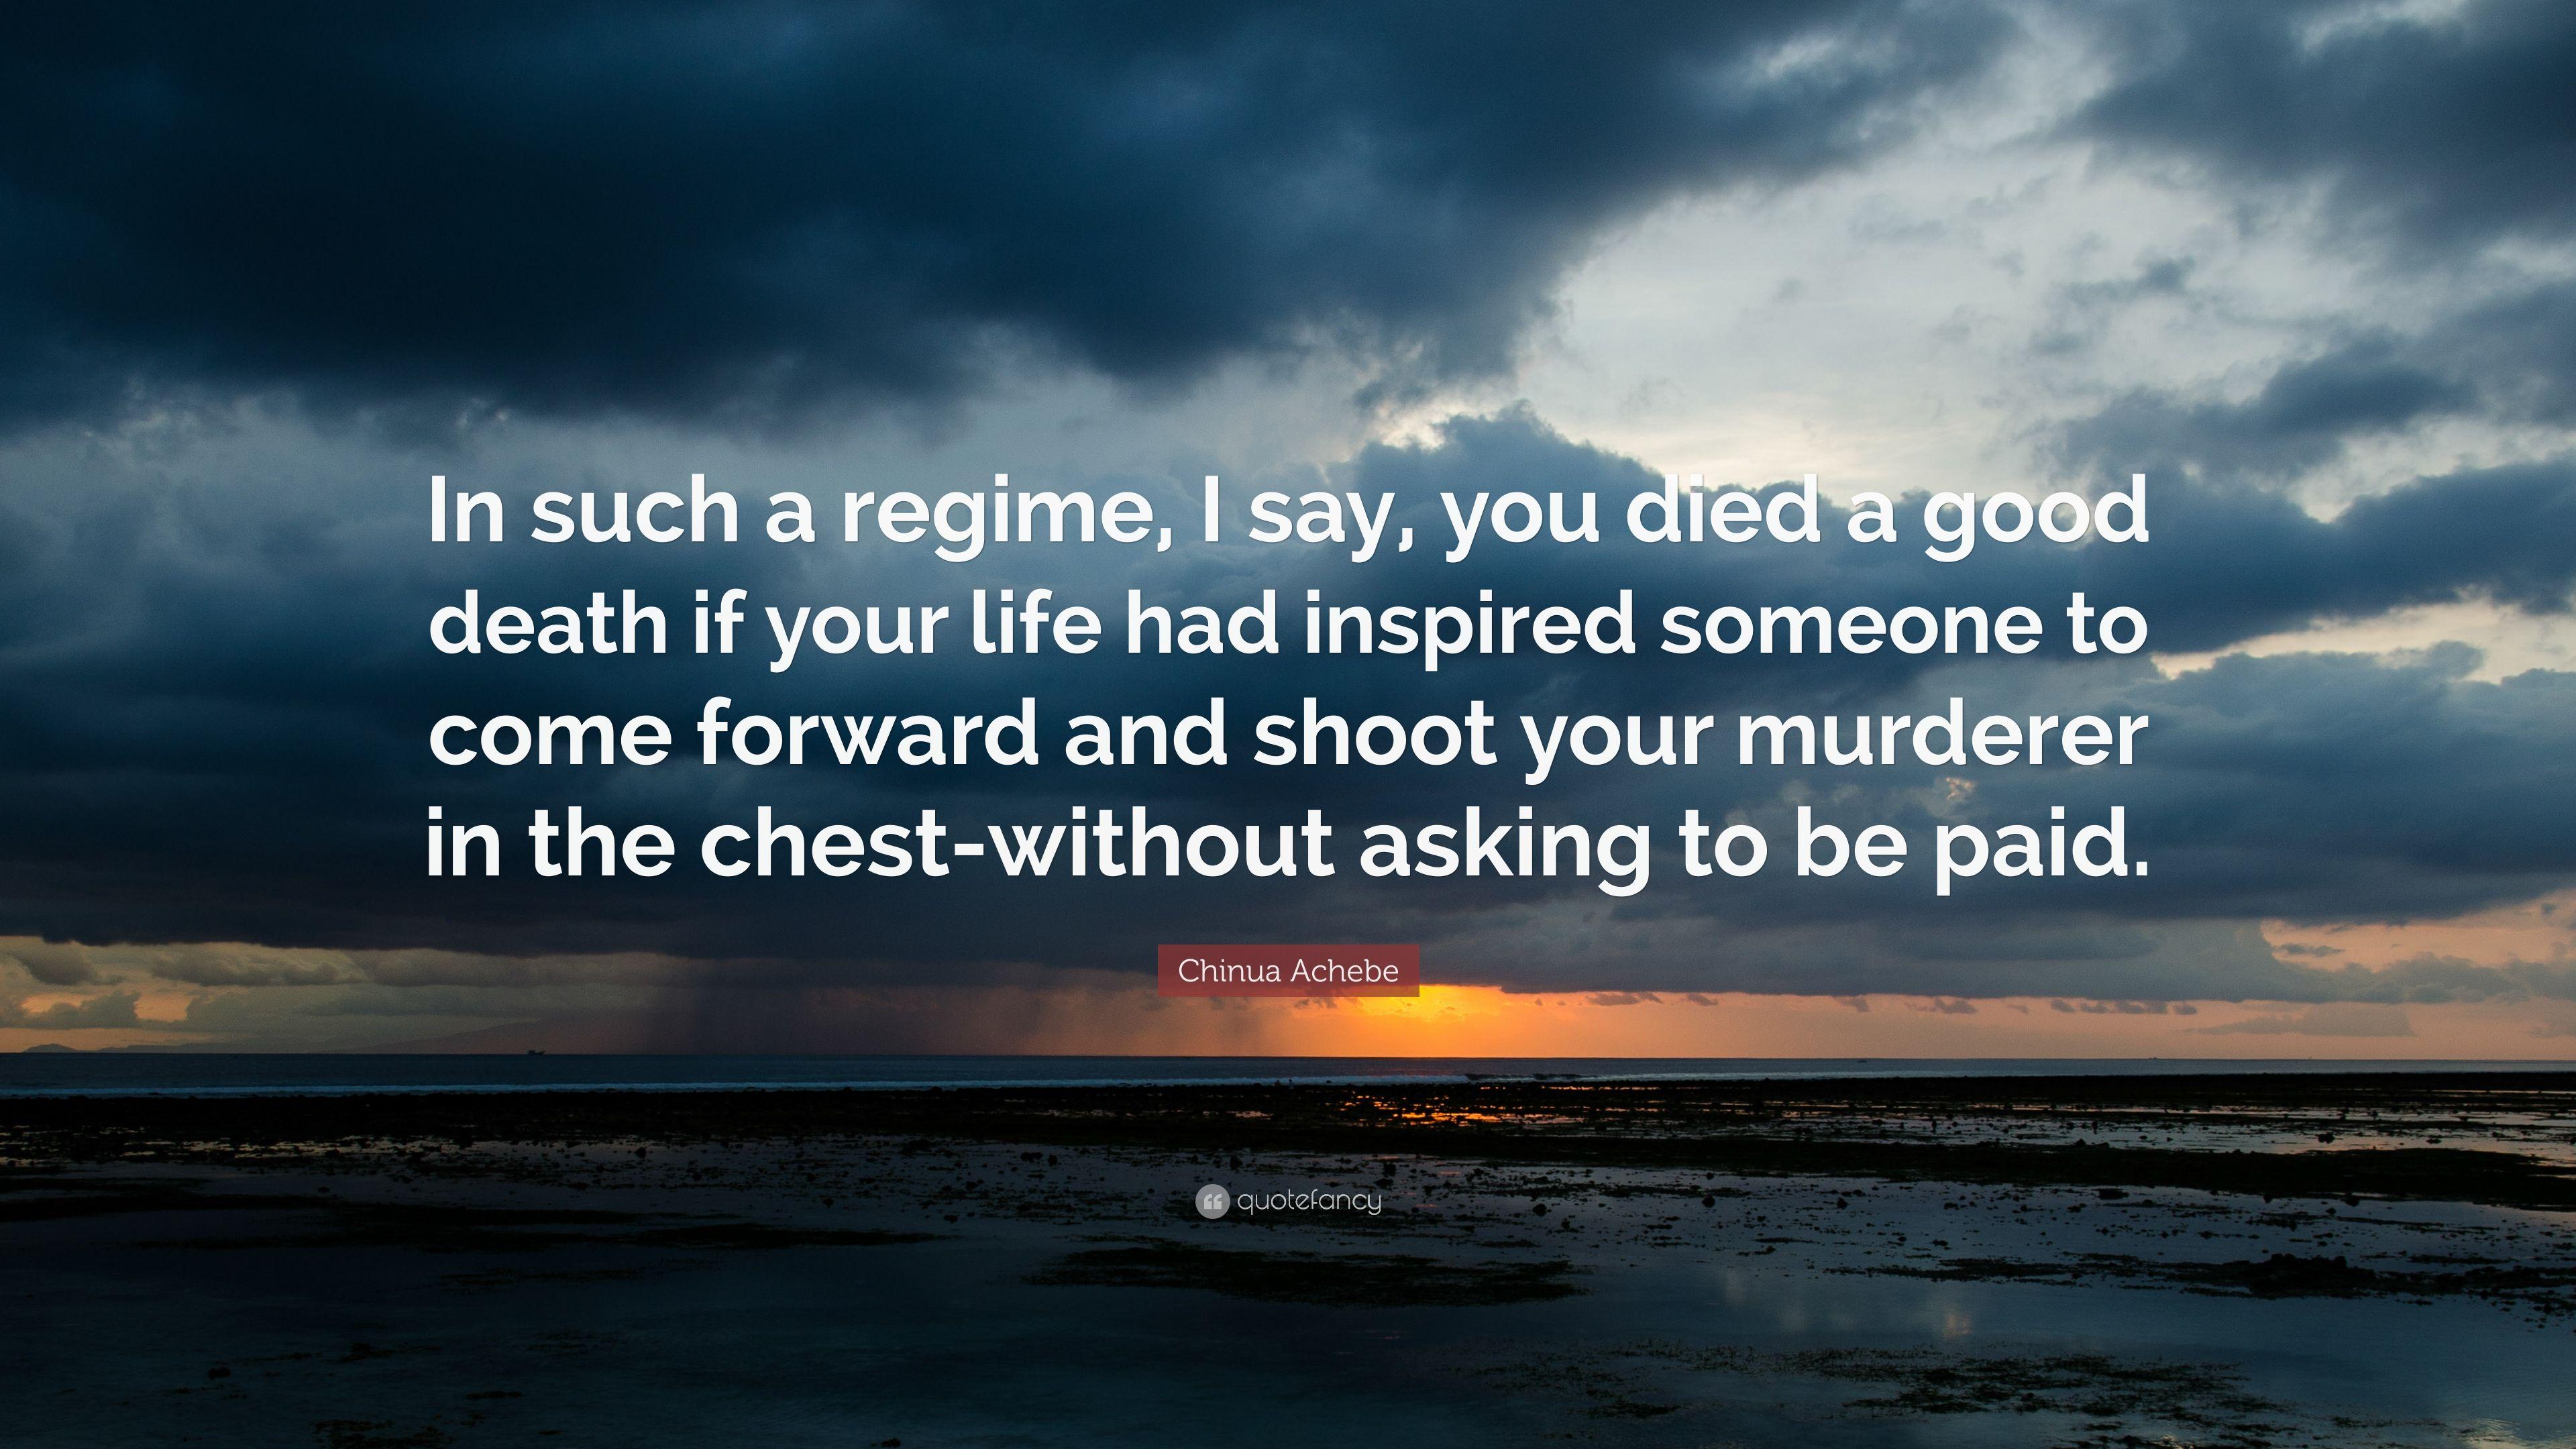 Chinua Achebe Quote: “In such a regime, I say, you died a good death